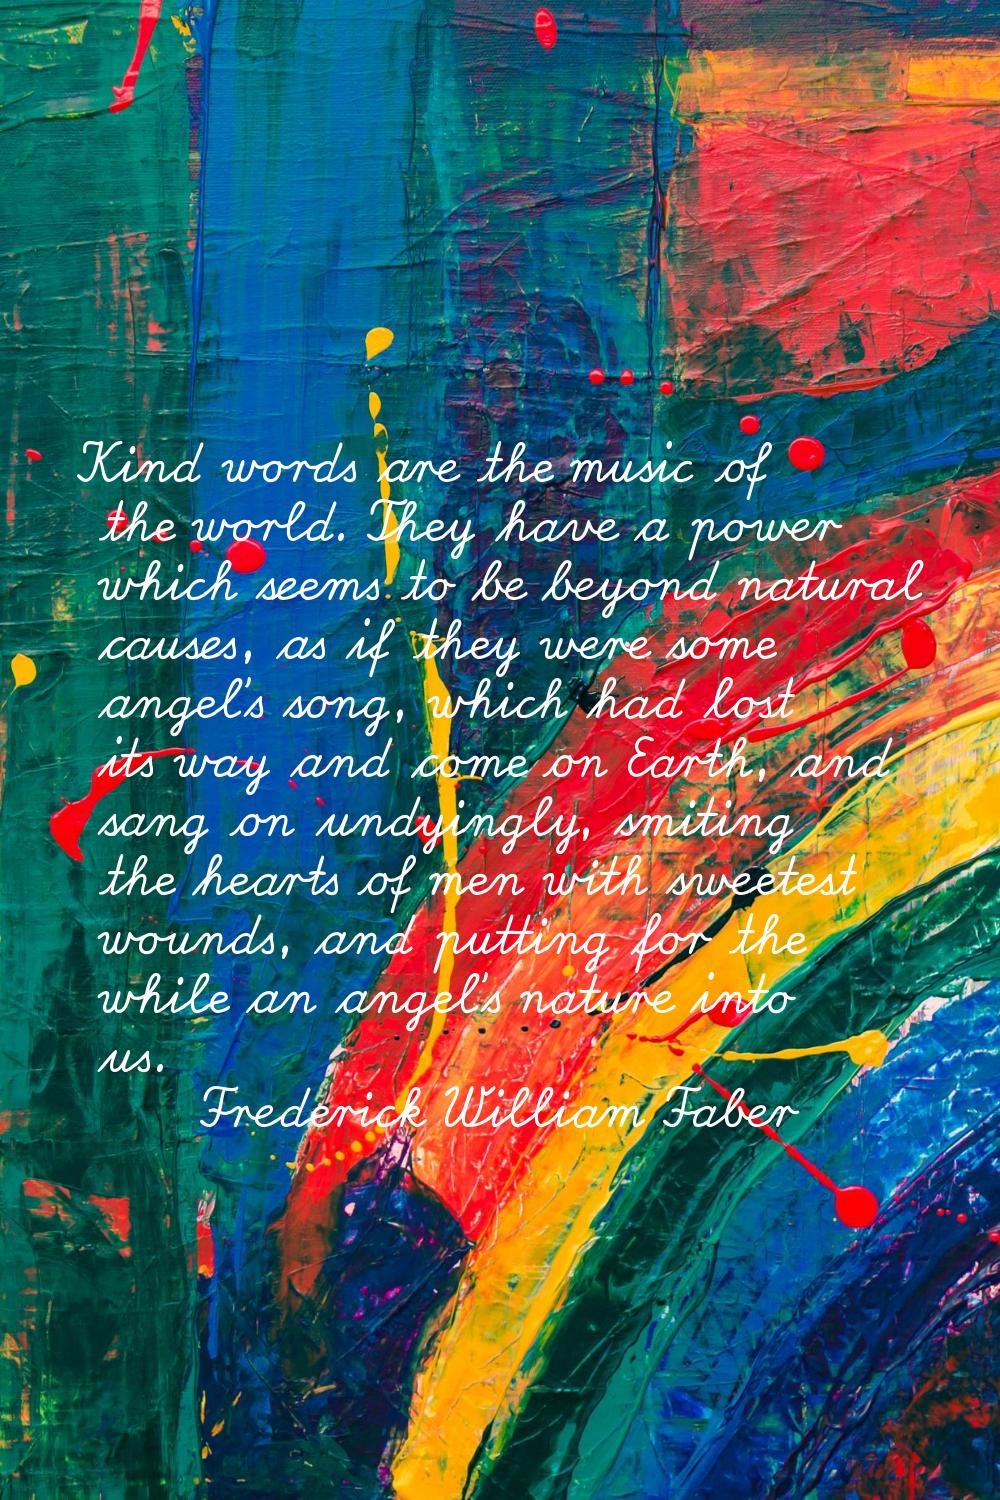 Kind words are the music of the world. They have a power which seems to be beyond natural causes, a